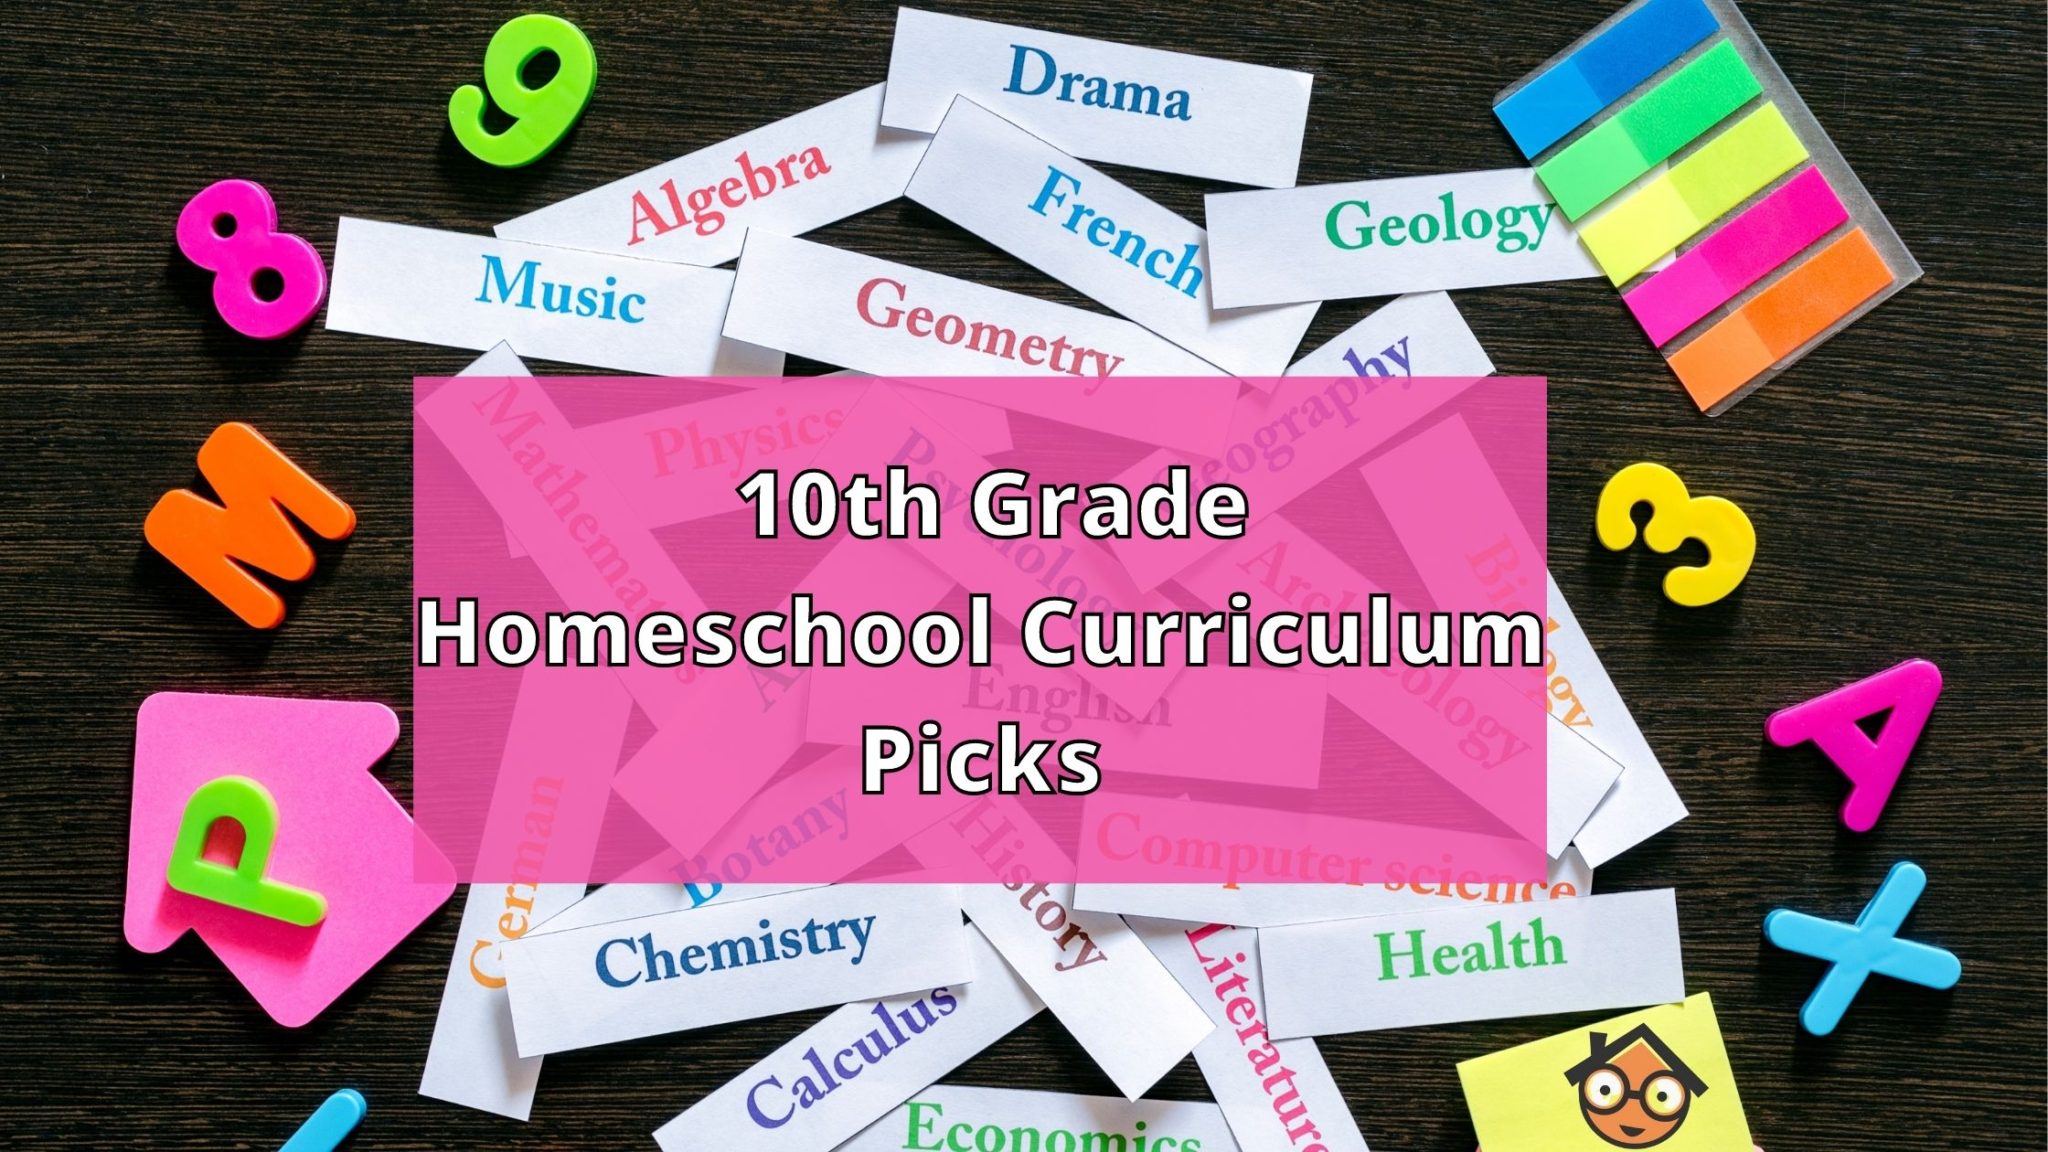 You are currently viewing Our 10th Grade Homeschool Curriculum Picks for 2022-2023 School Year